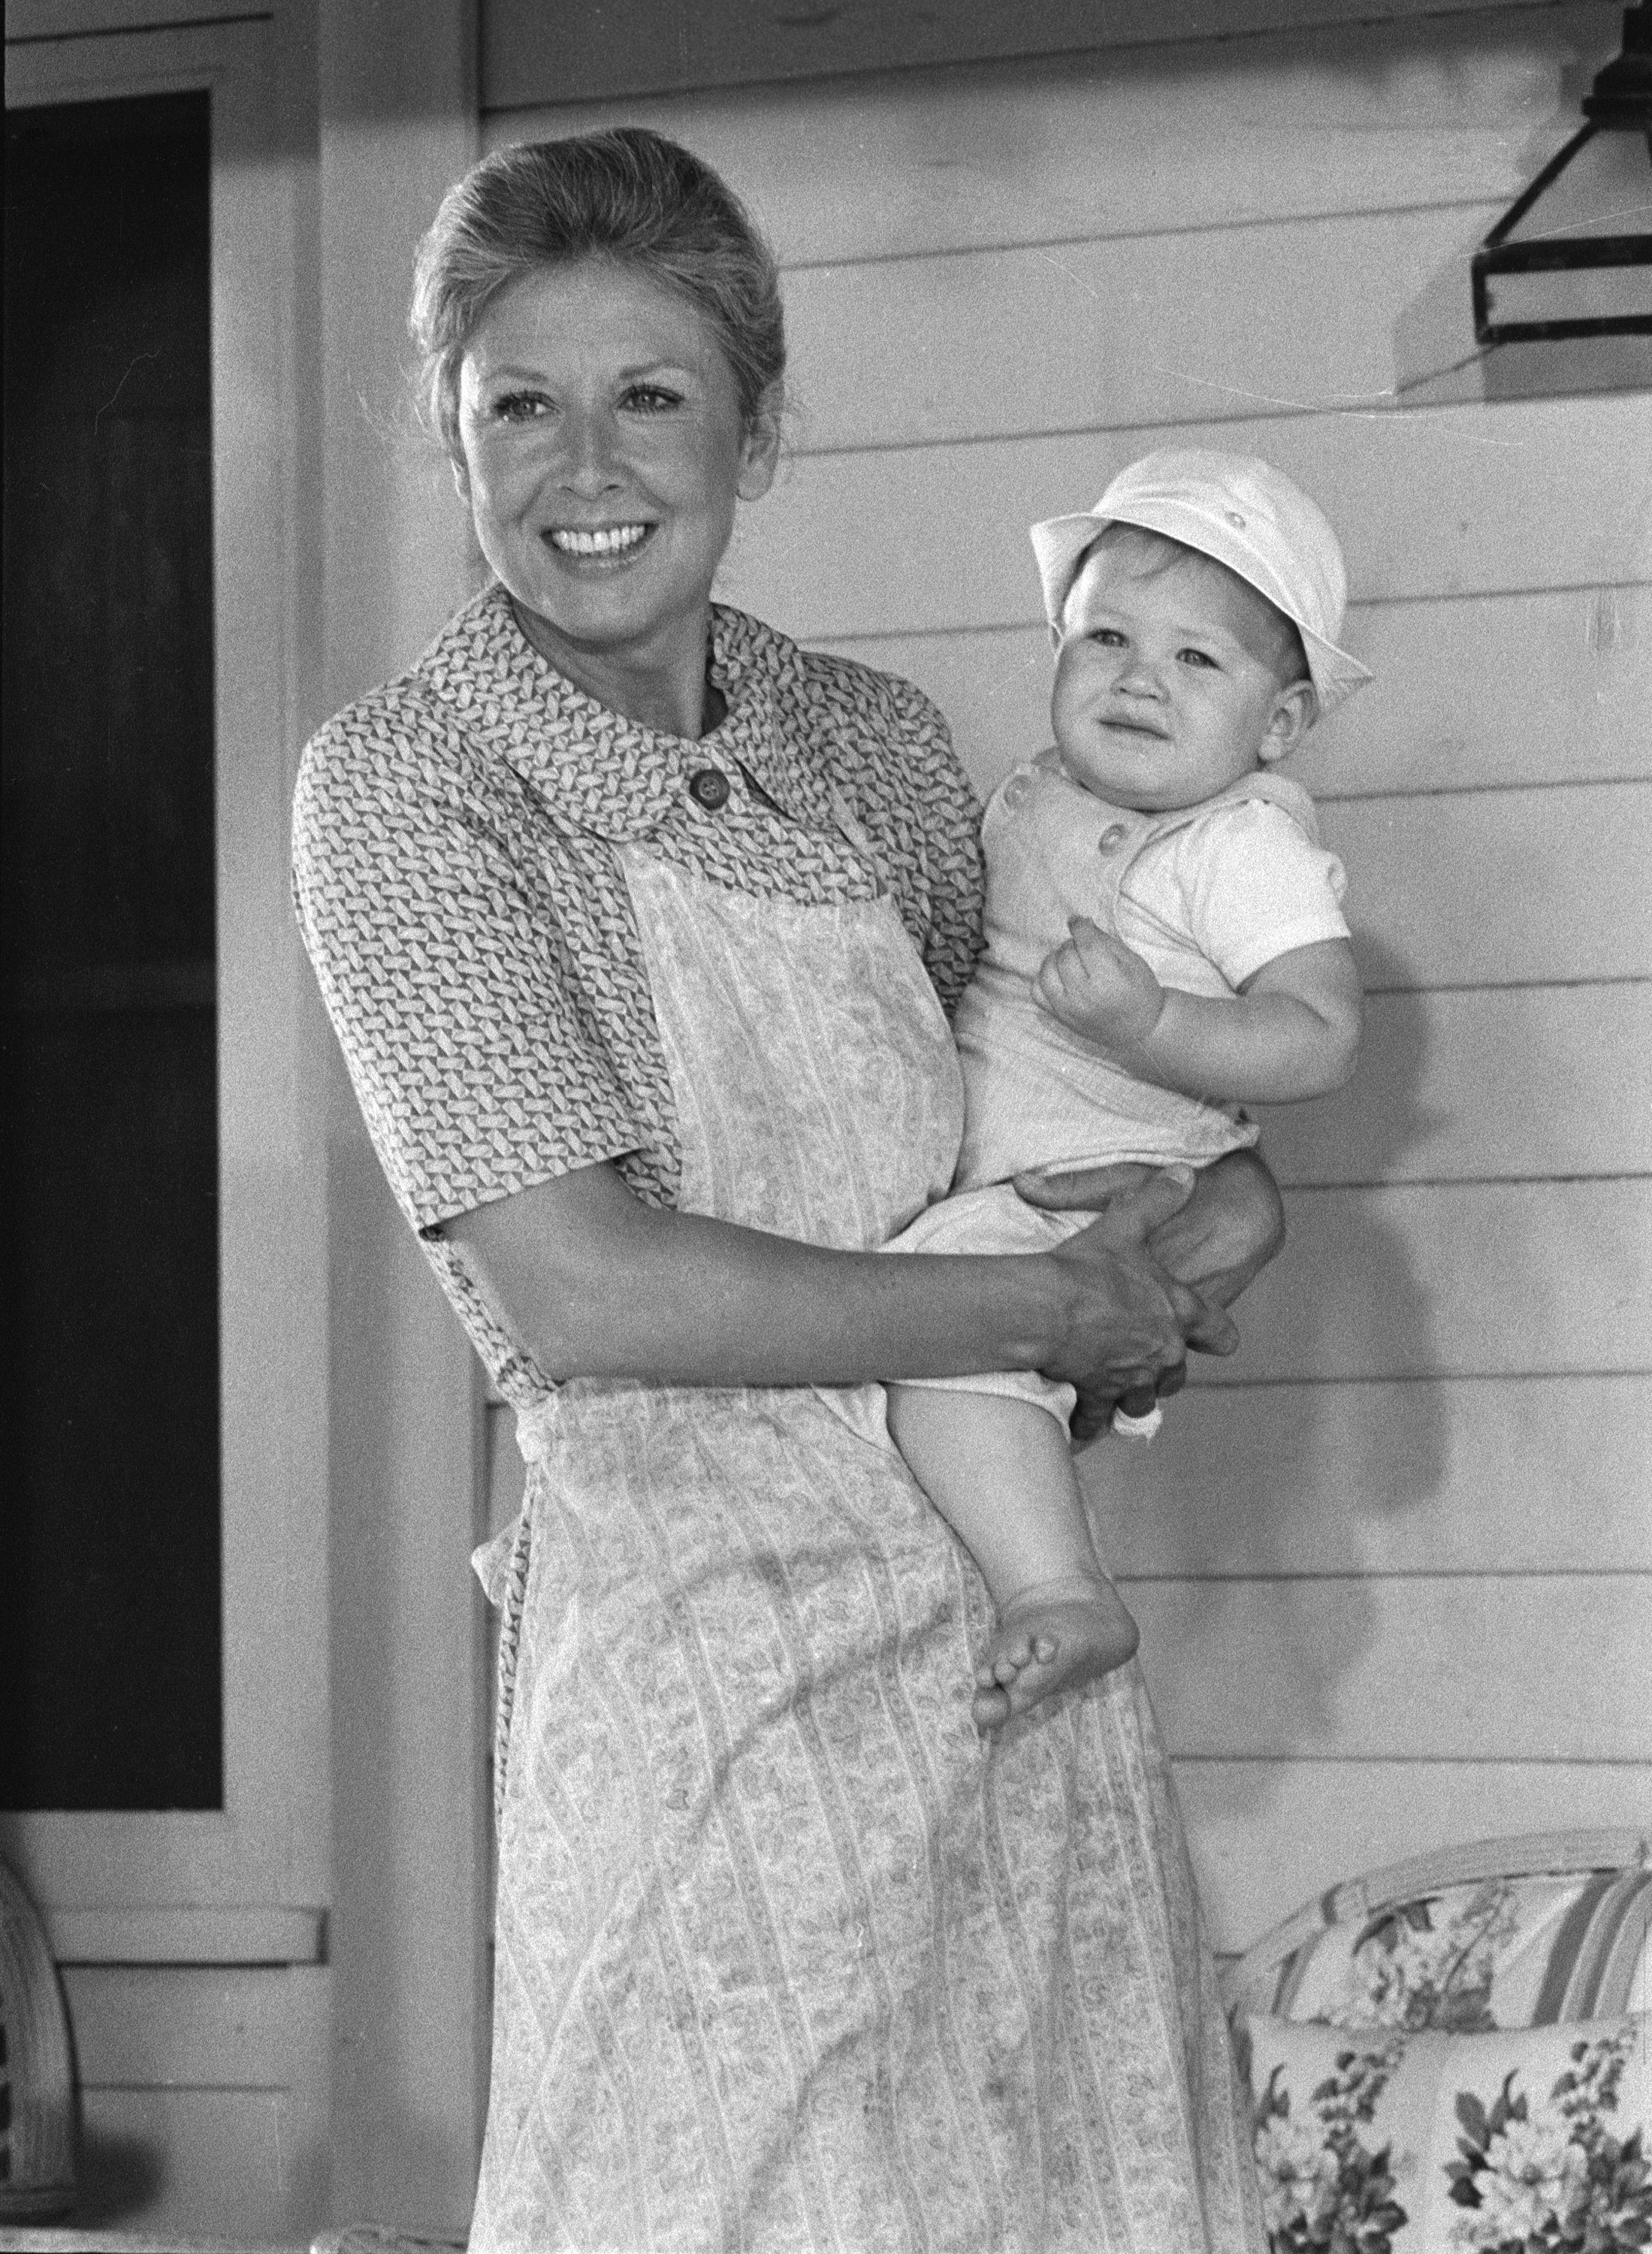 Michael Learned as Olivia Walton in "The Waltons" during an episode "The Empty Nest" on June 16, 1978 | Photo: Getty Images